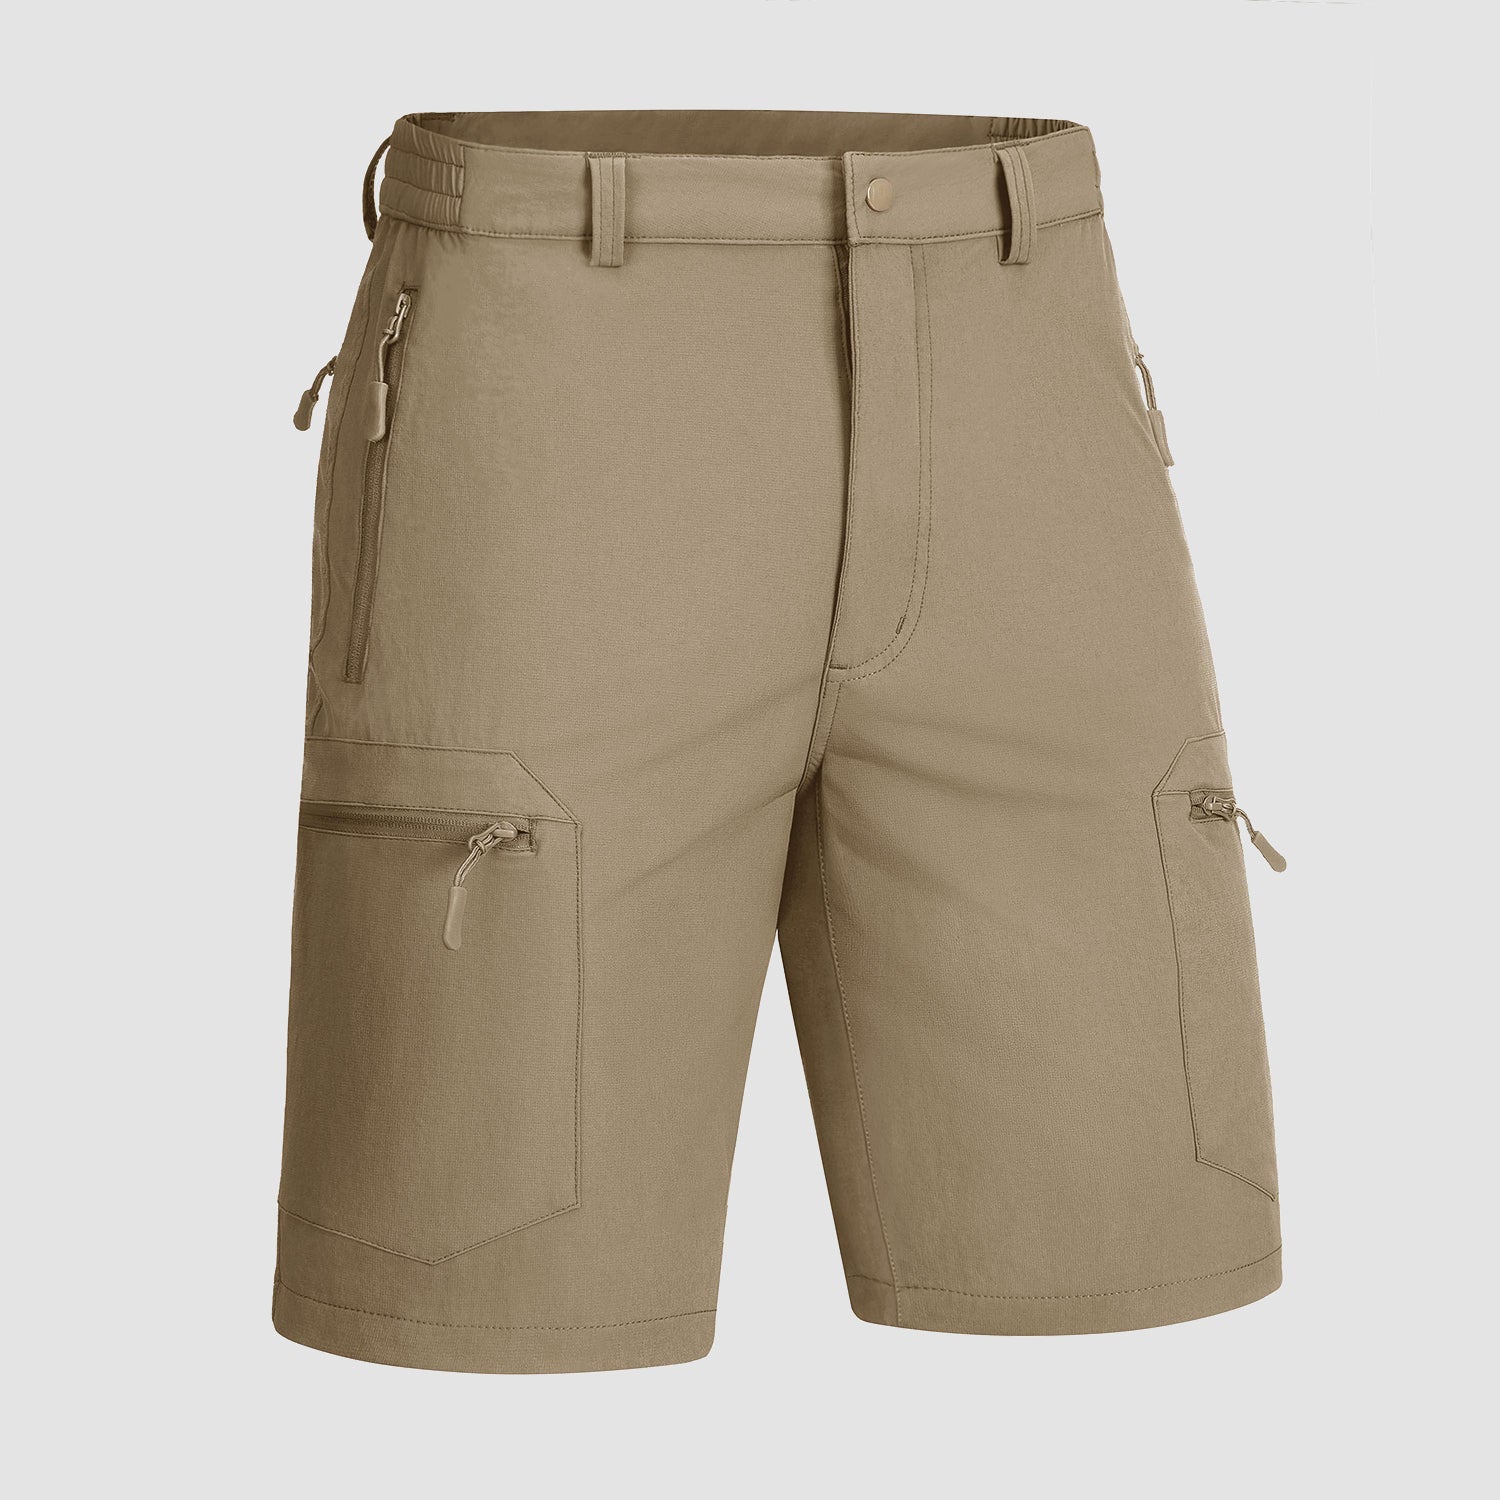 Fesfesfes Fashion Mens Shorts with Pocket Zipper Buttons Solid Color  Leisure Cargo Shorts Tooling Mid-Length Shorts Clearance 